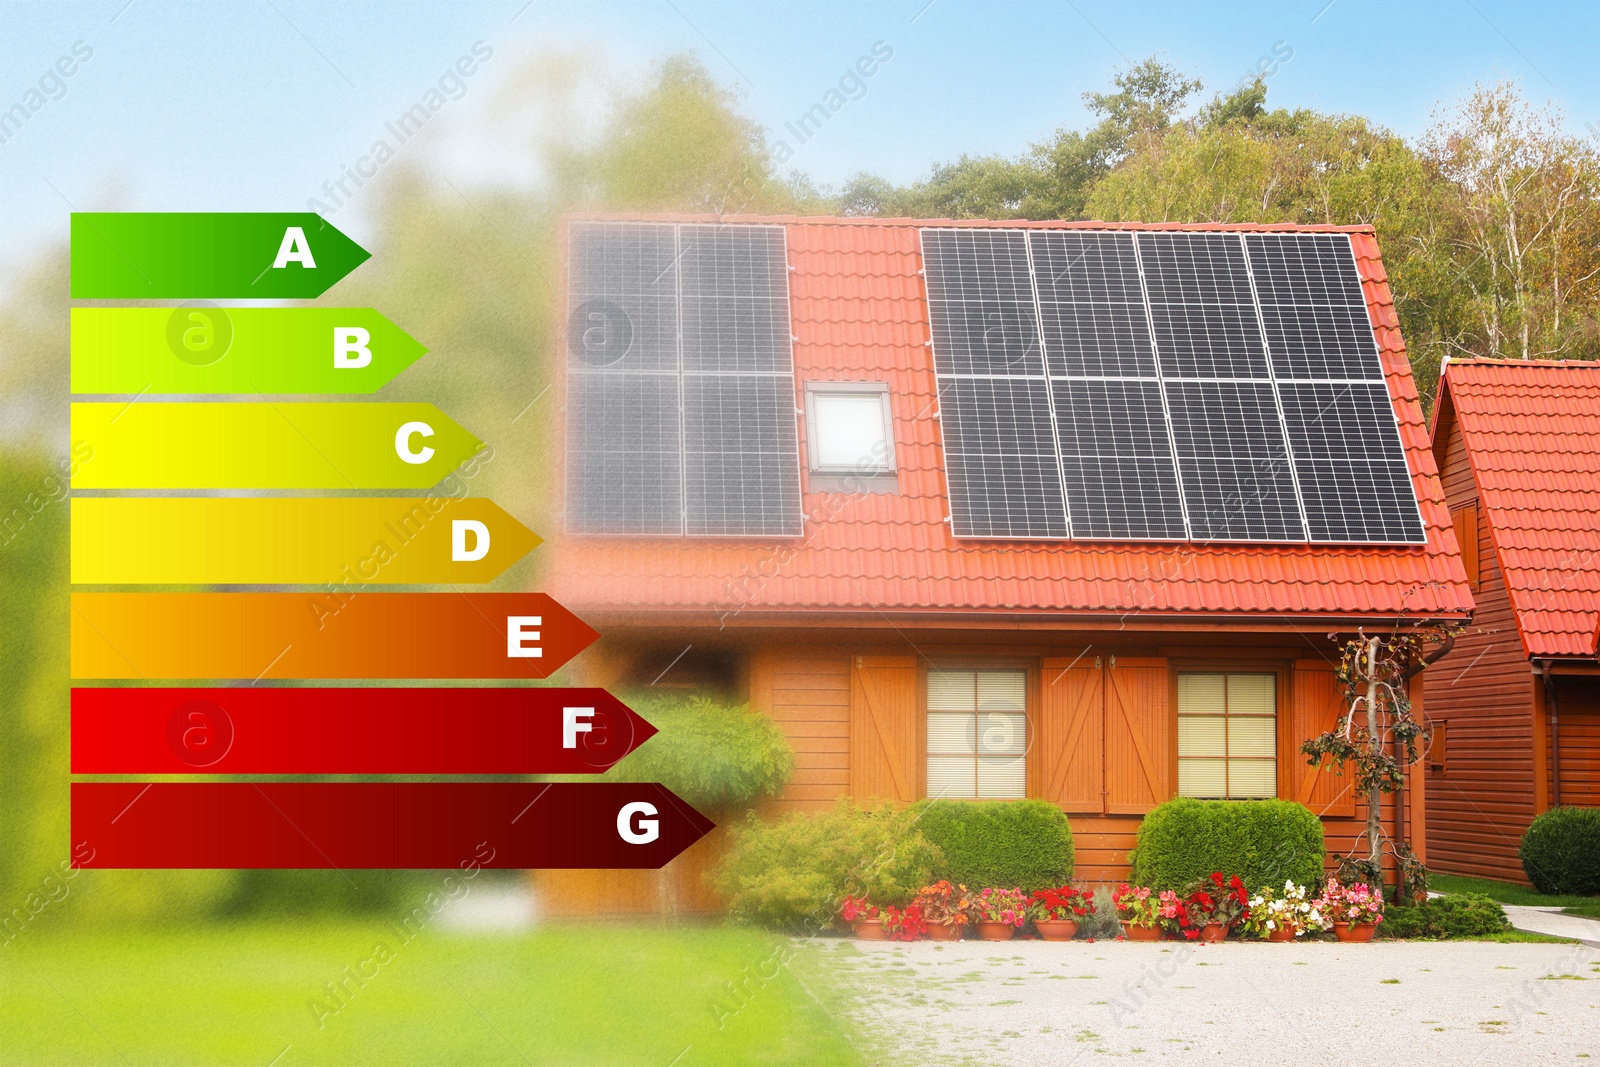 Image of Energy efficiency rating and blurred view of house with solar panels outdoors